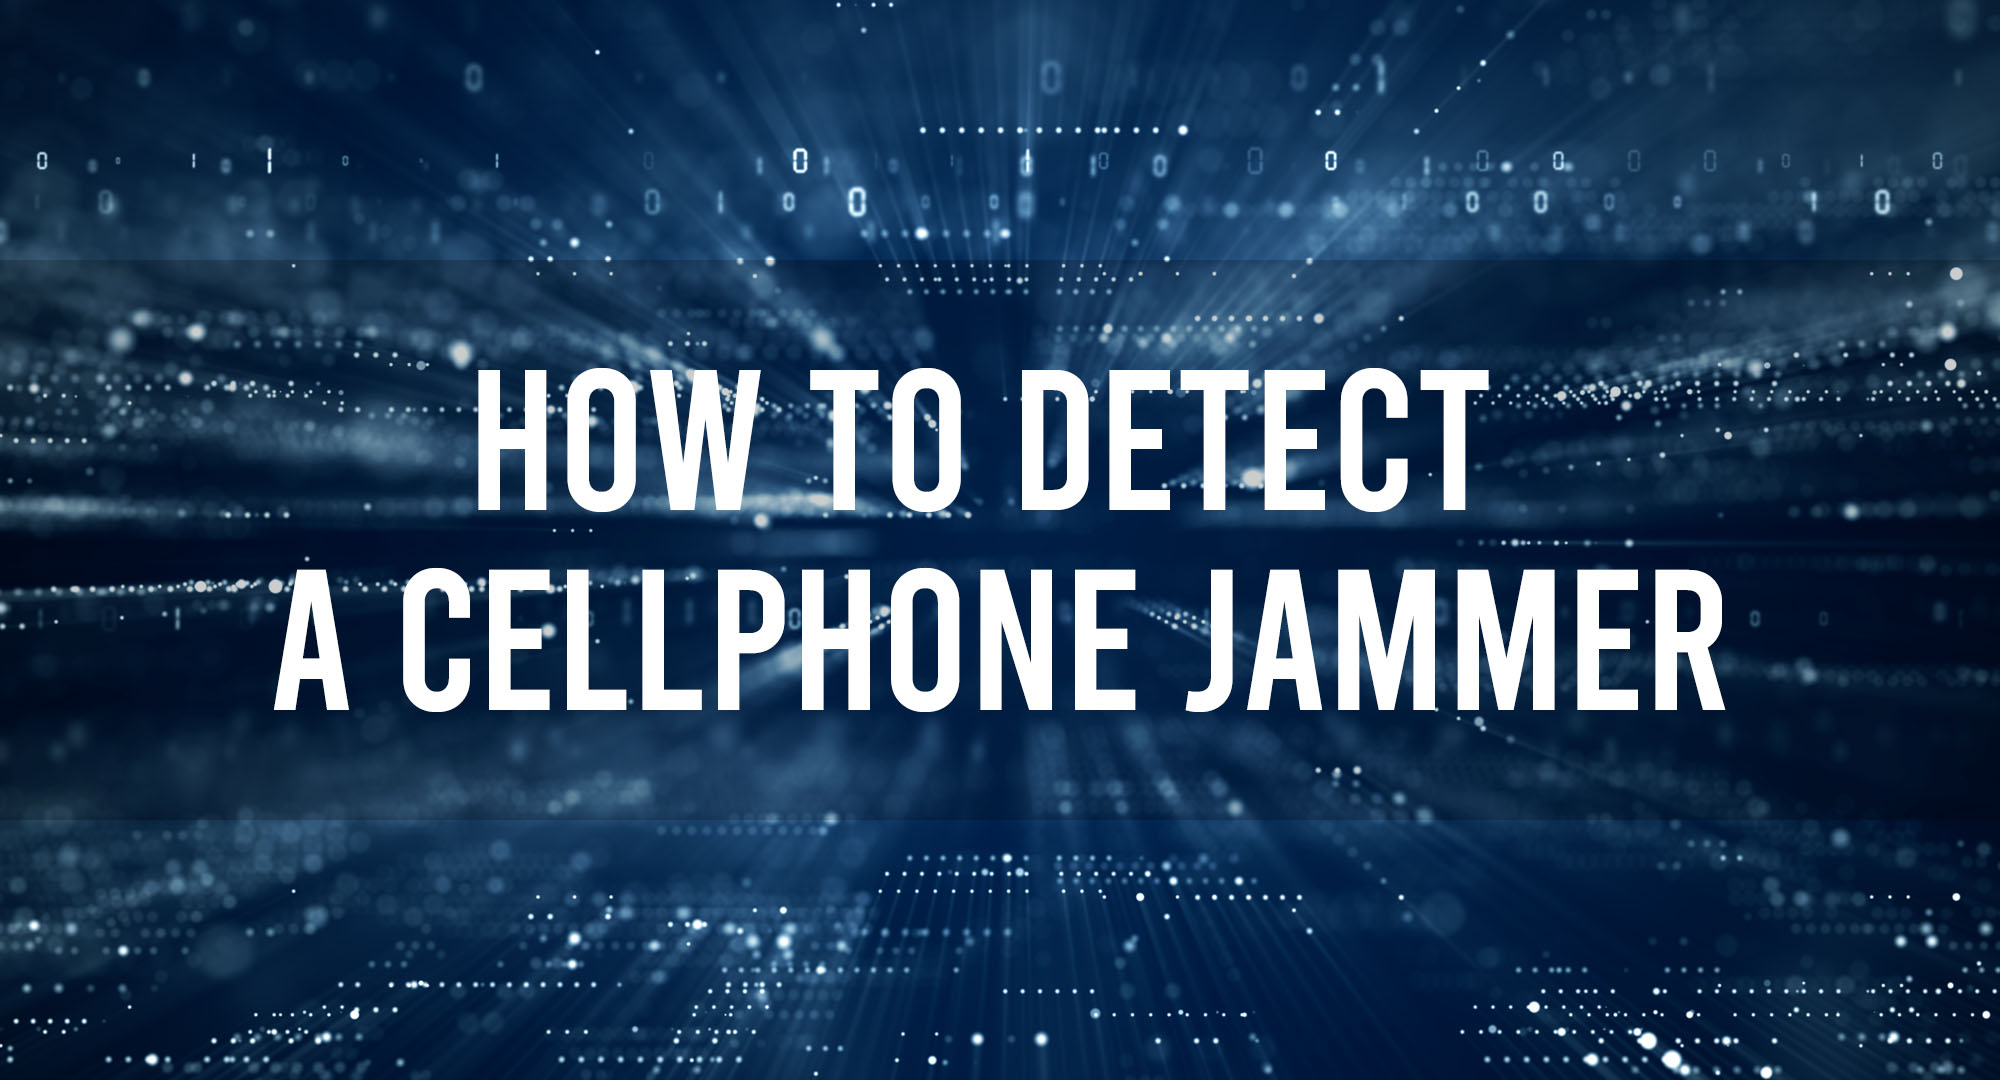 How to detect a cellphone jammer